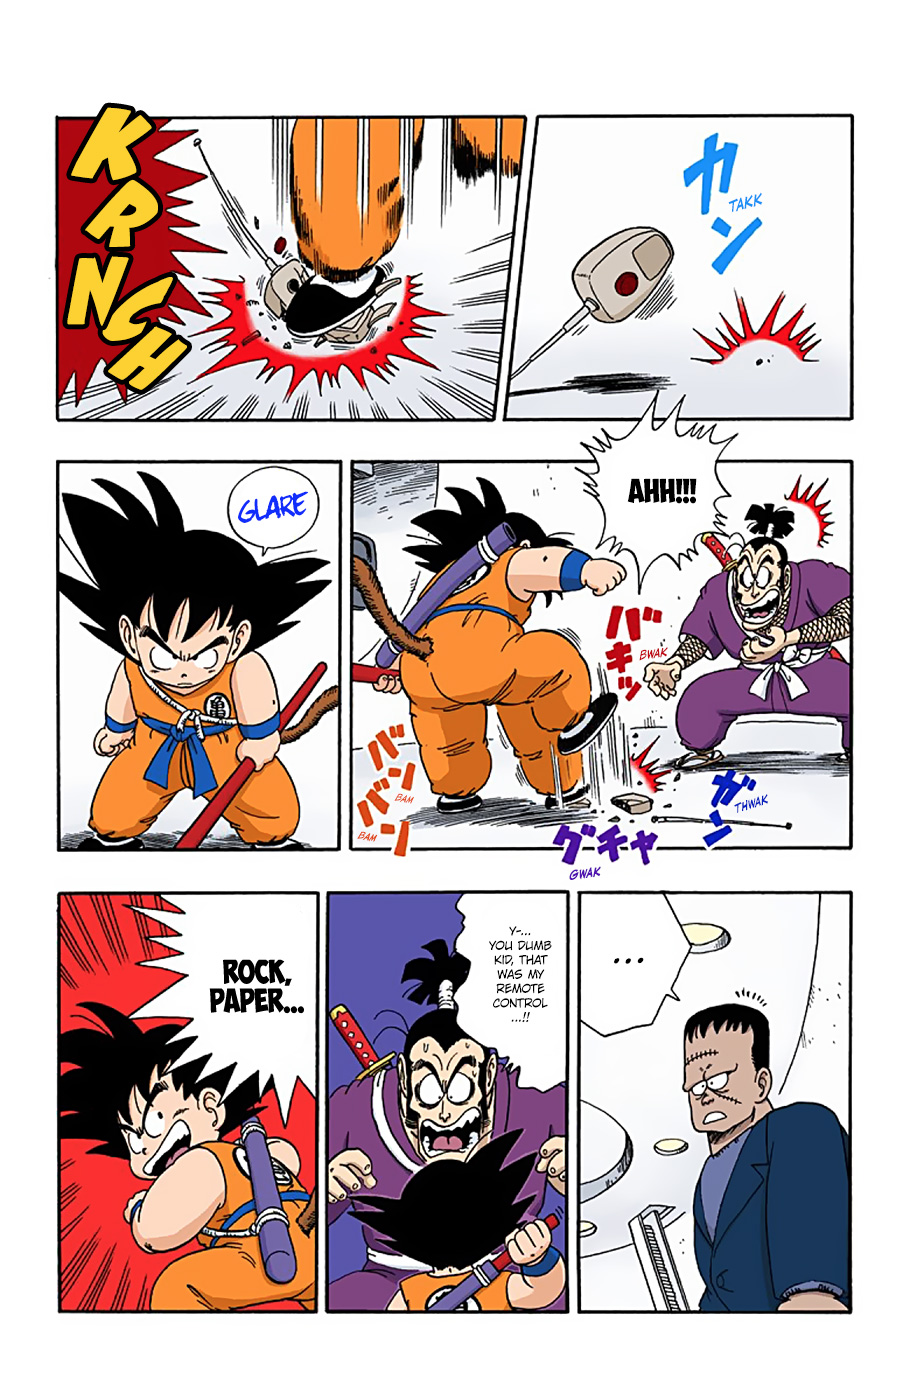 Dragon Ball Full Color Edition Vol. 5 Ch. 63 Android #8